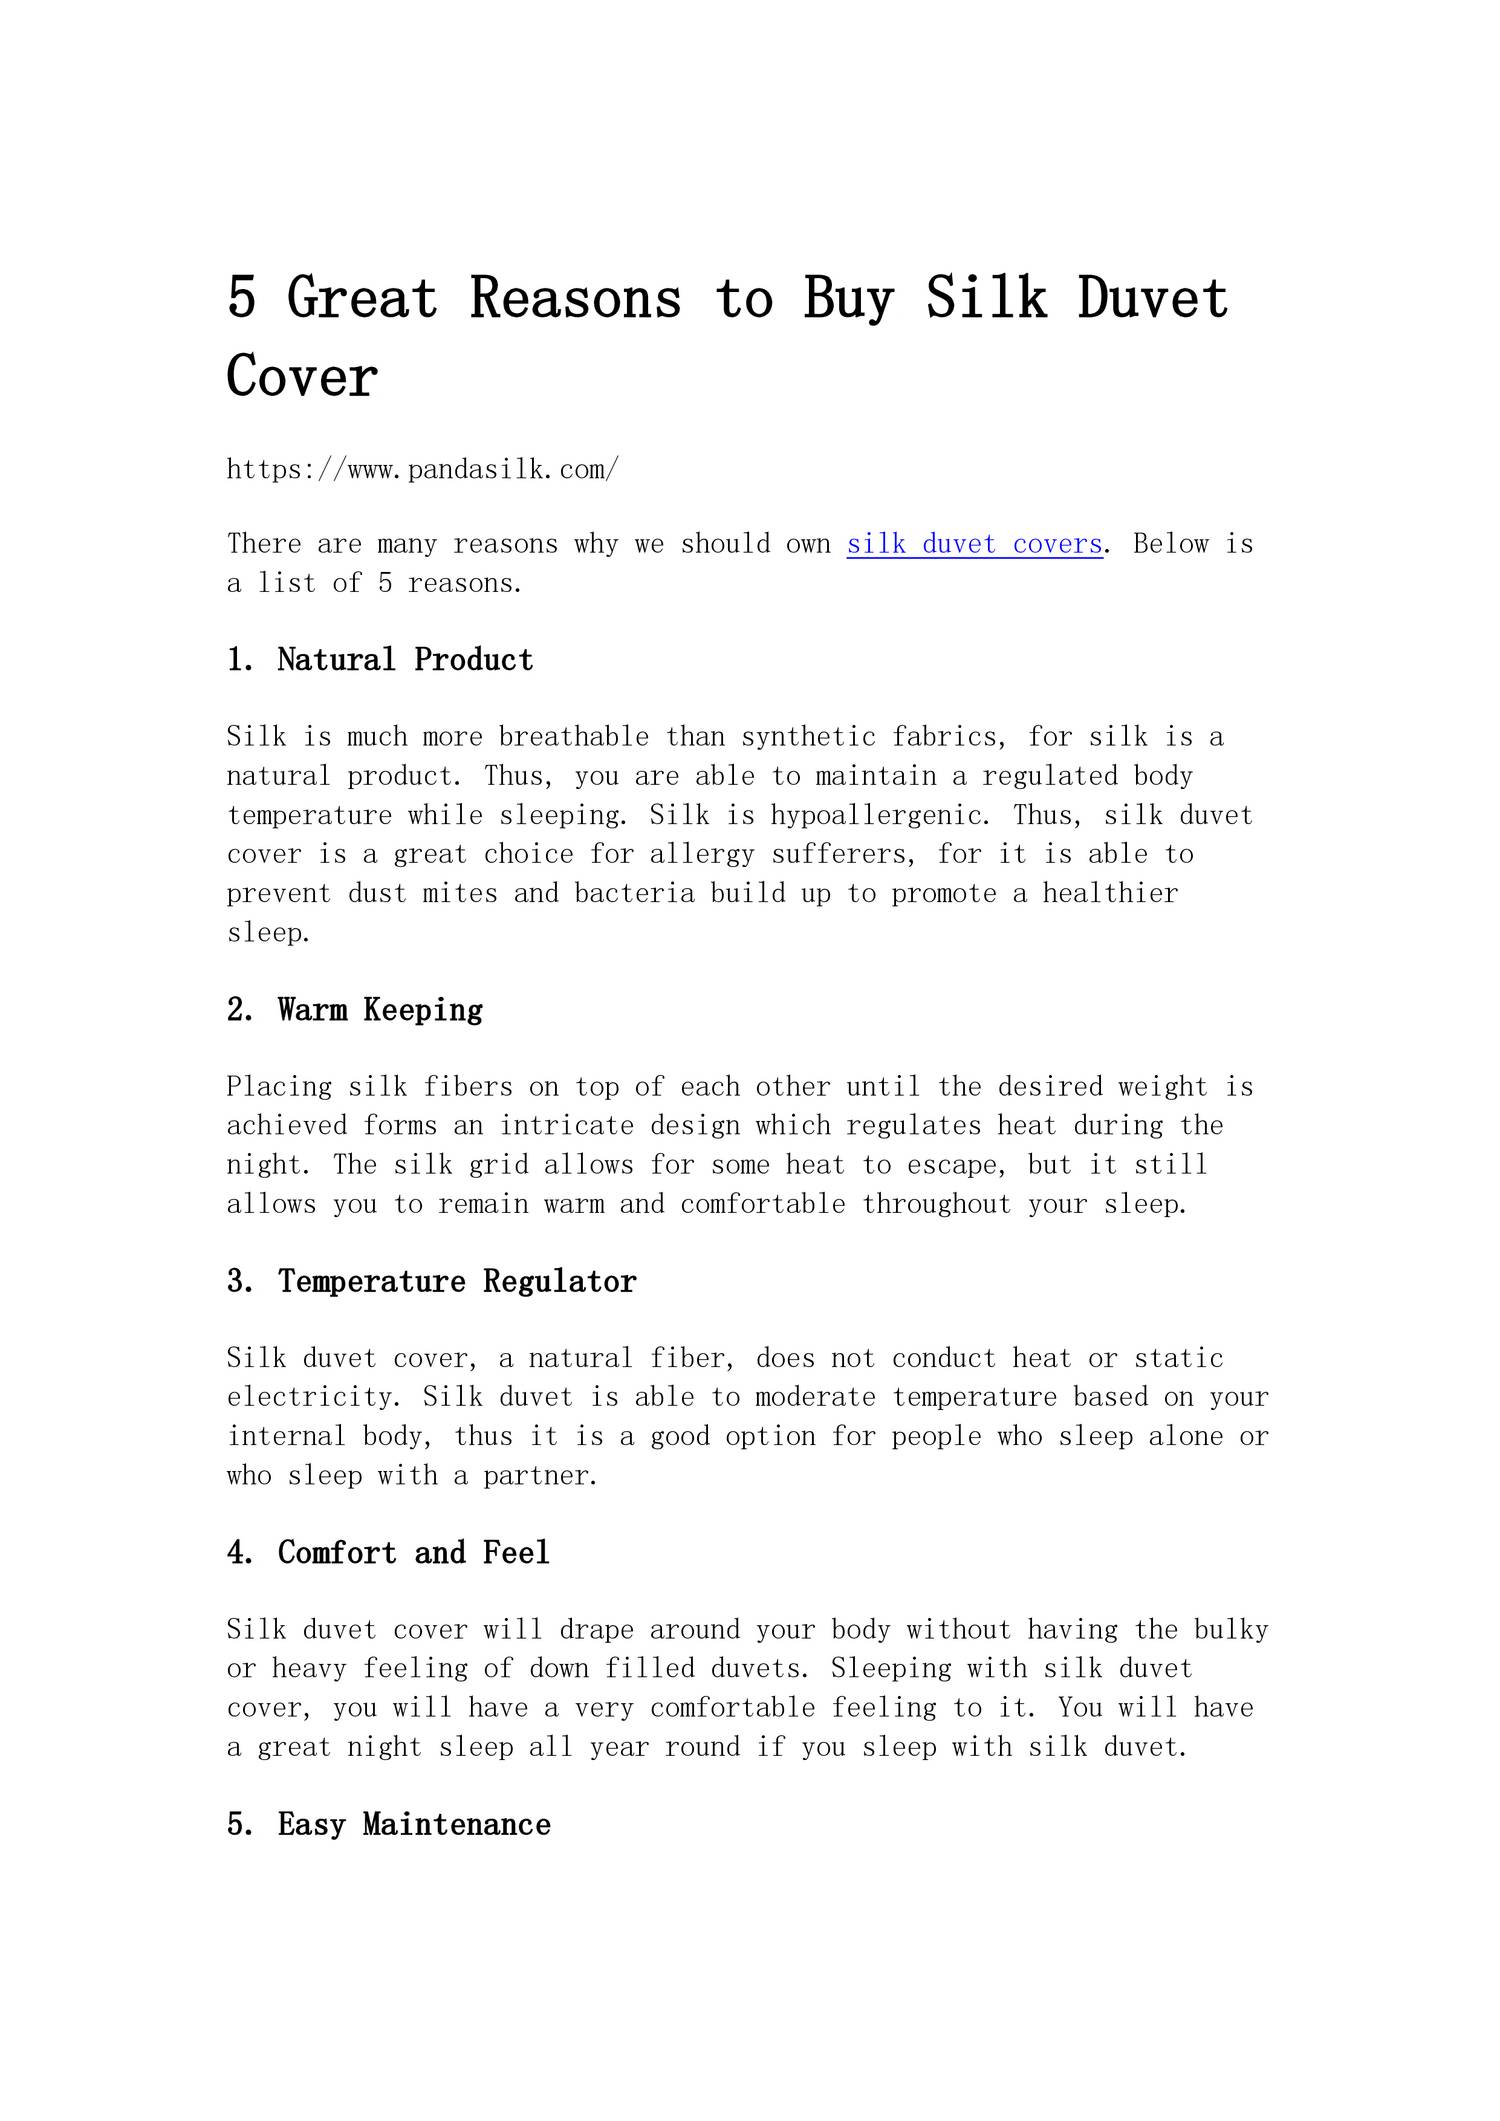 5 Great Reasons To Buy Silk Duvet Cover Pdf Docdroid